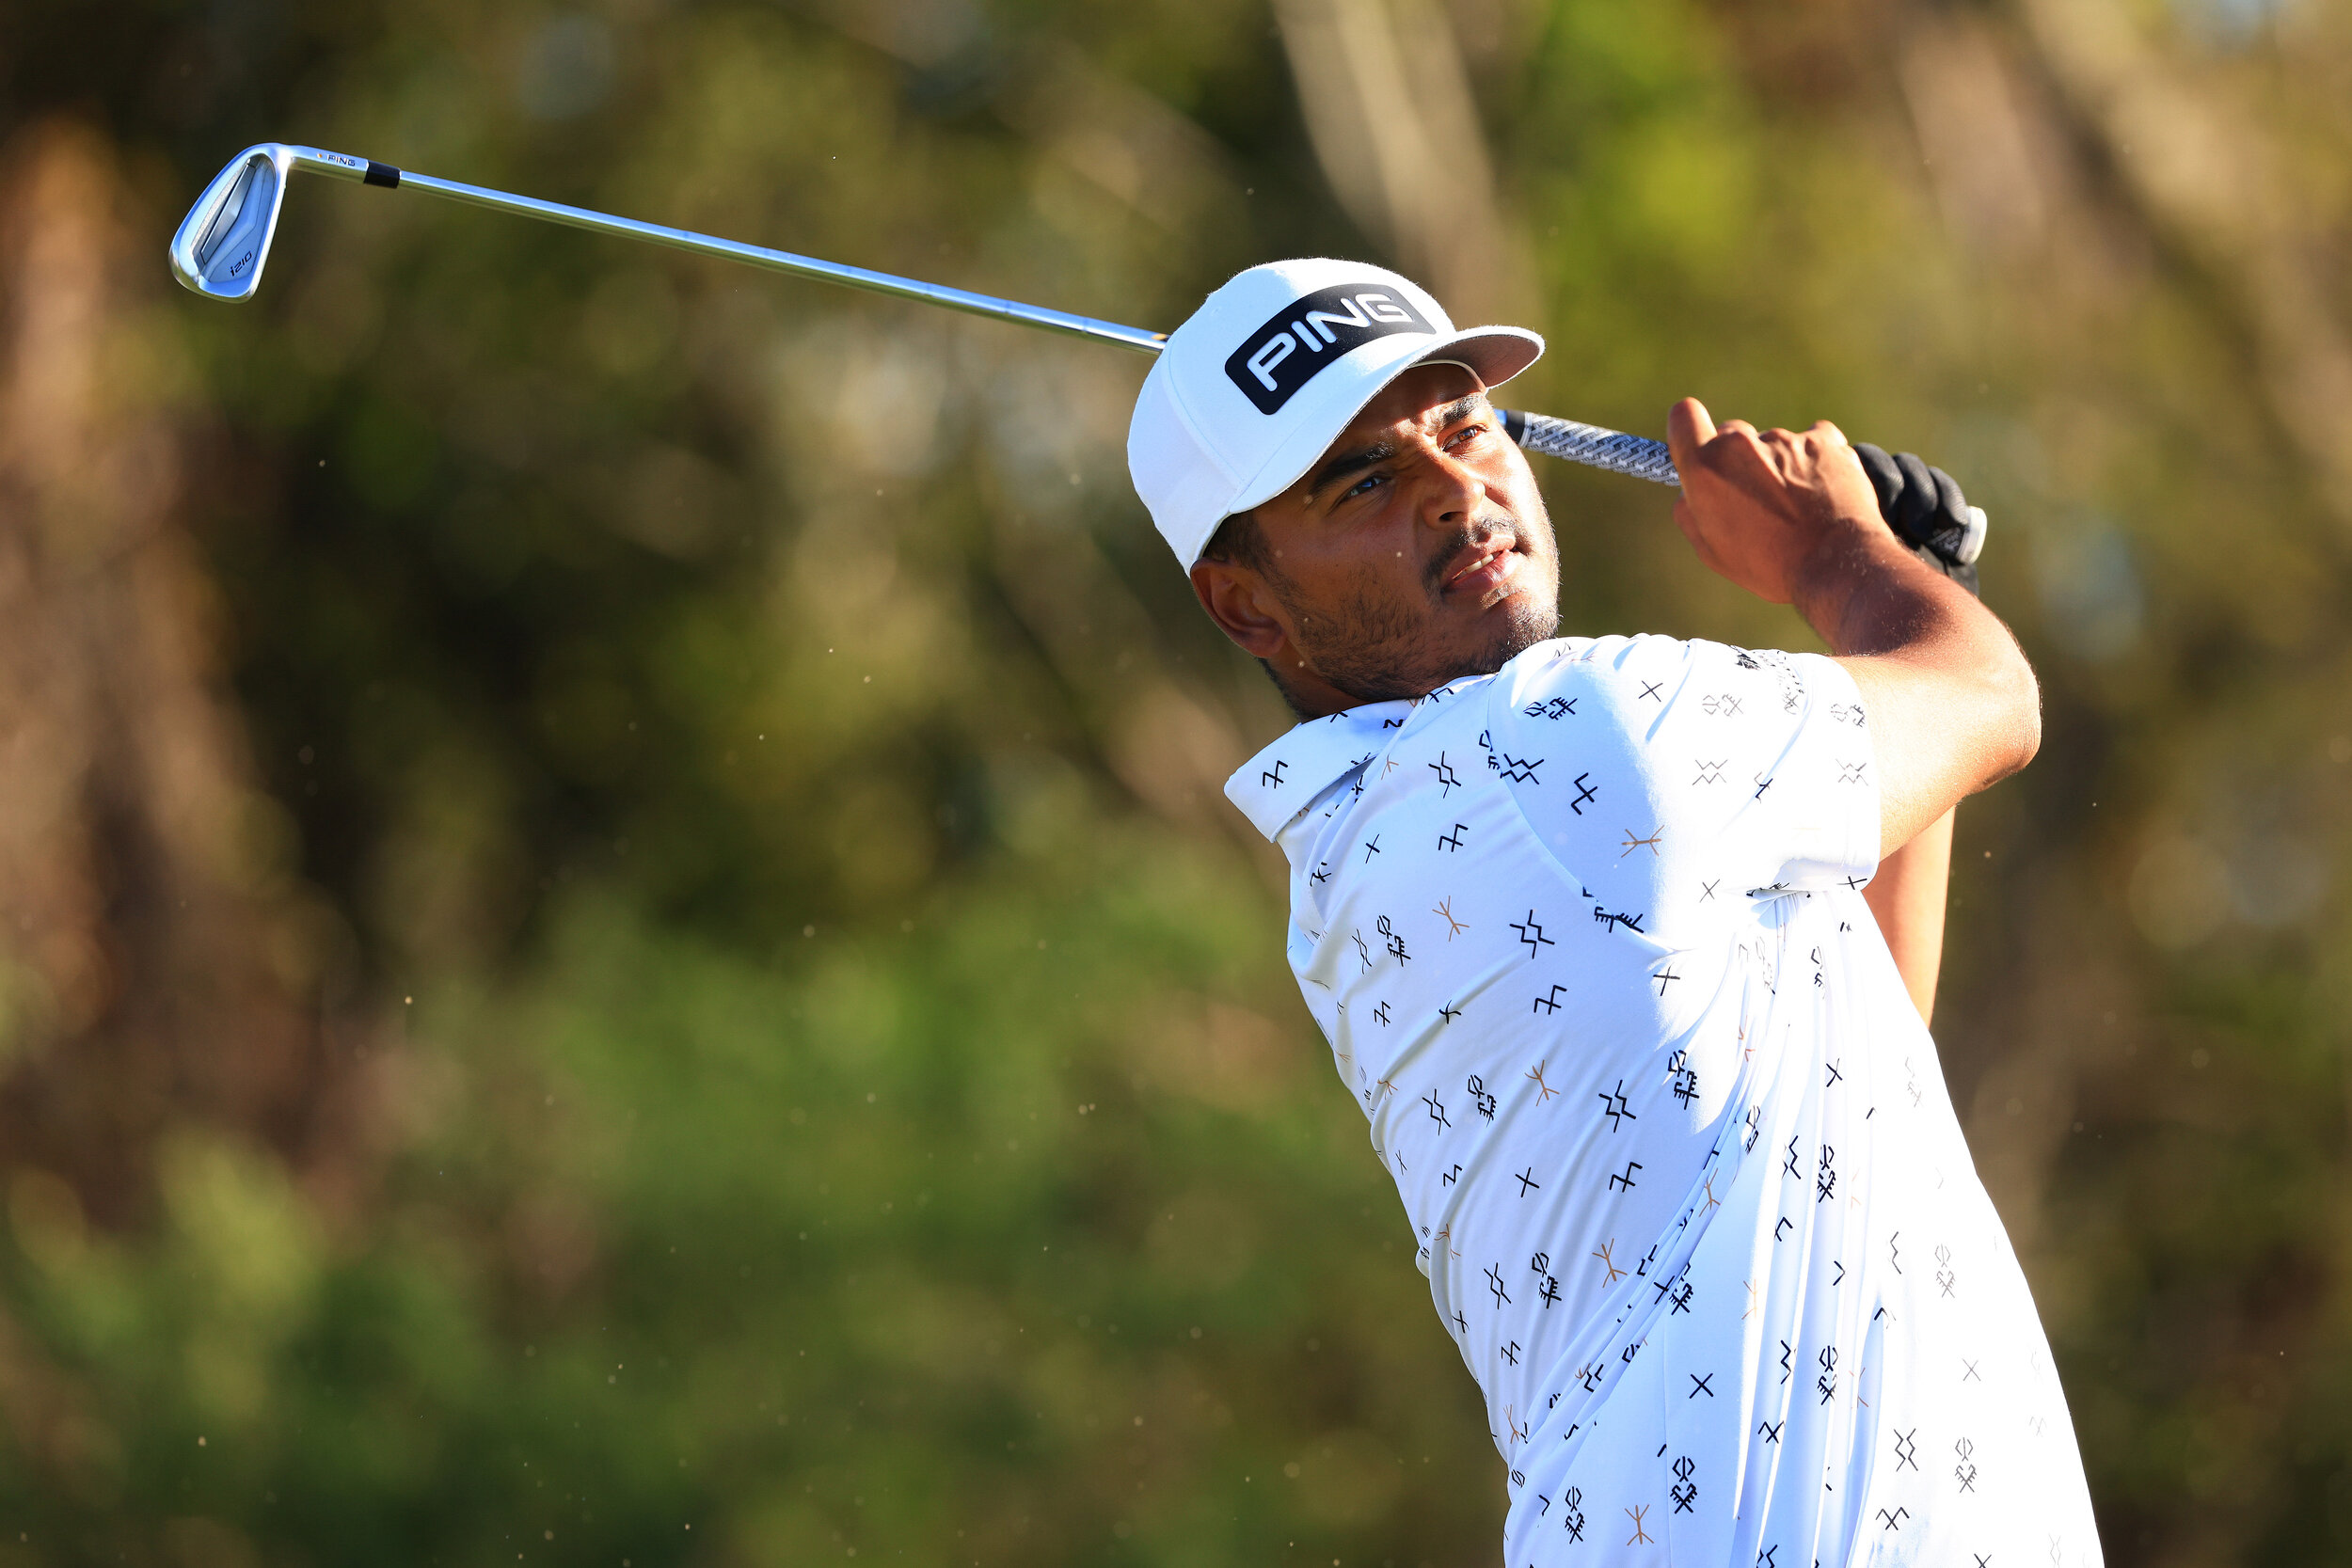  ORLANDO, FLORIDA - MARCH 04: Sebastian Munoz of Colombia plays his shot from the seventh tee during the first round of the Arnold Palmer Invitational Presented by MasterCard at the Bay Hill Club and Lodge on March 04, 2021 in Orlando, Florida. (Phot